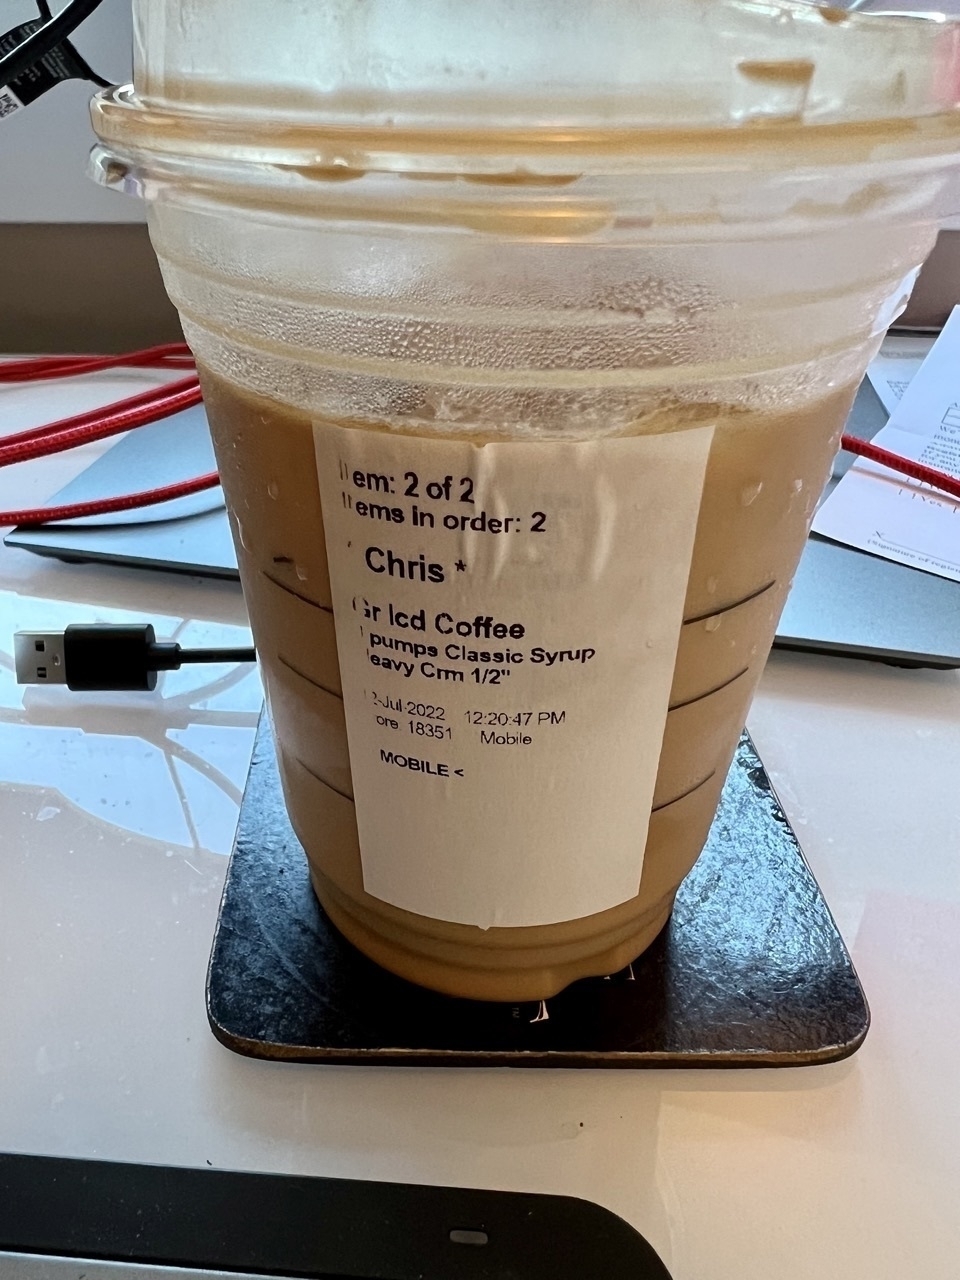 Starbucks iced coffee drink with a sticker on it for *Chris*.